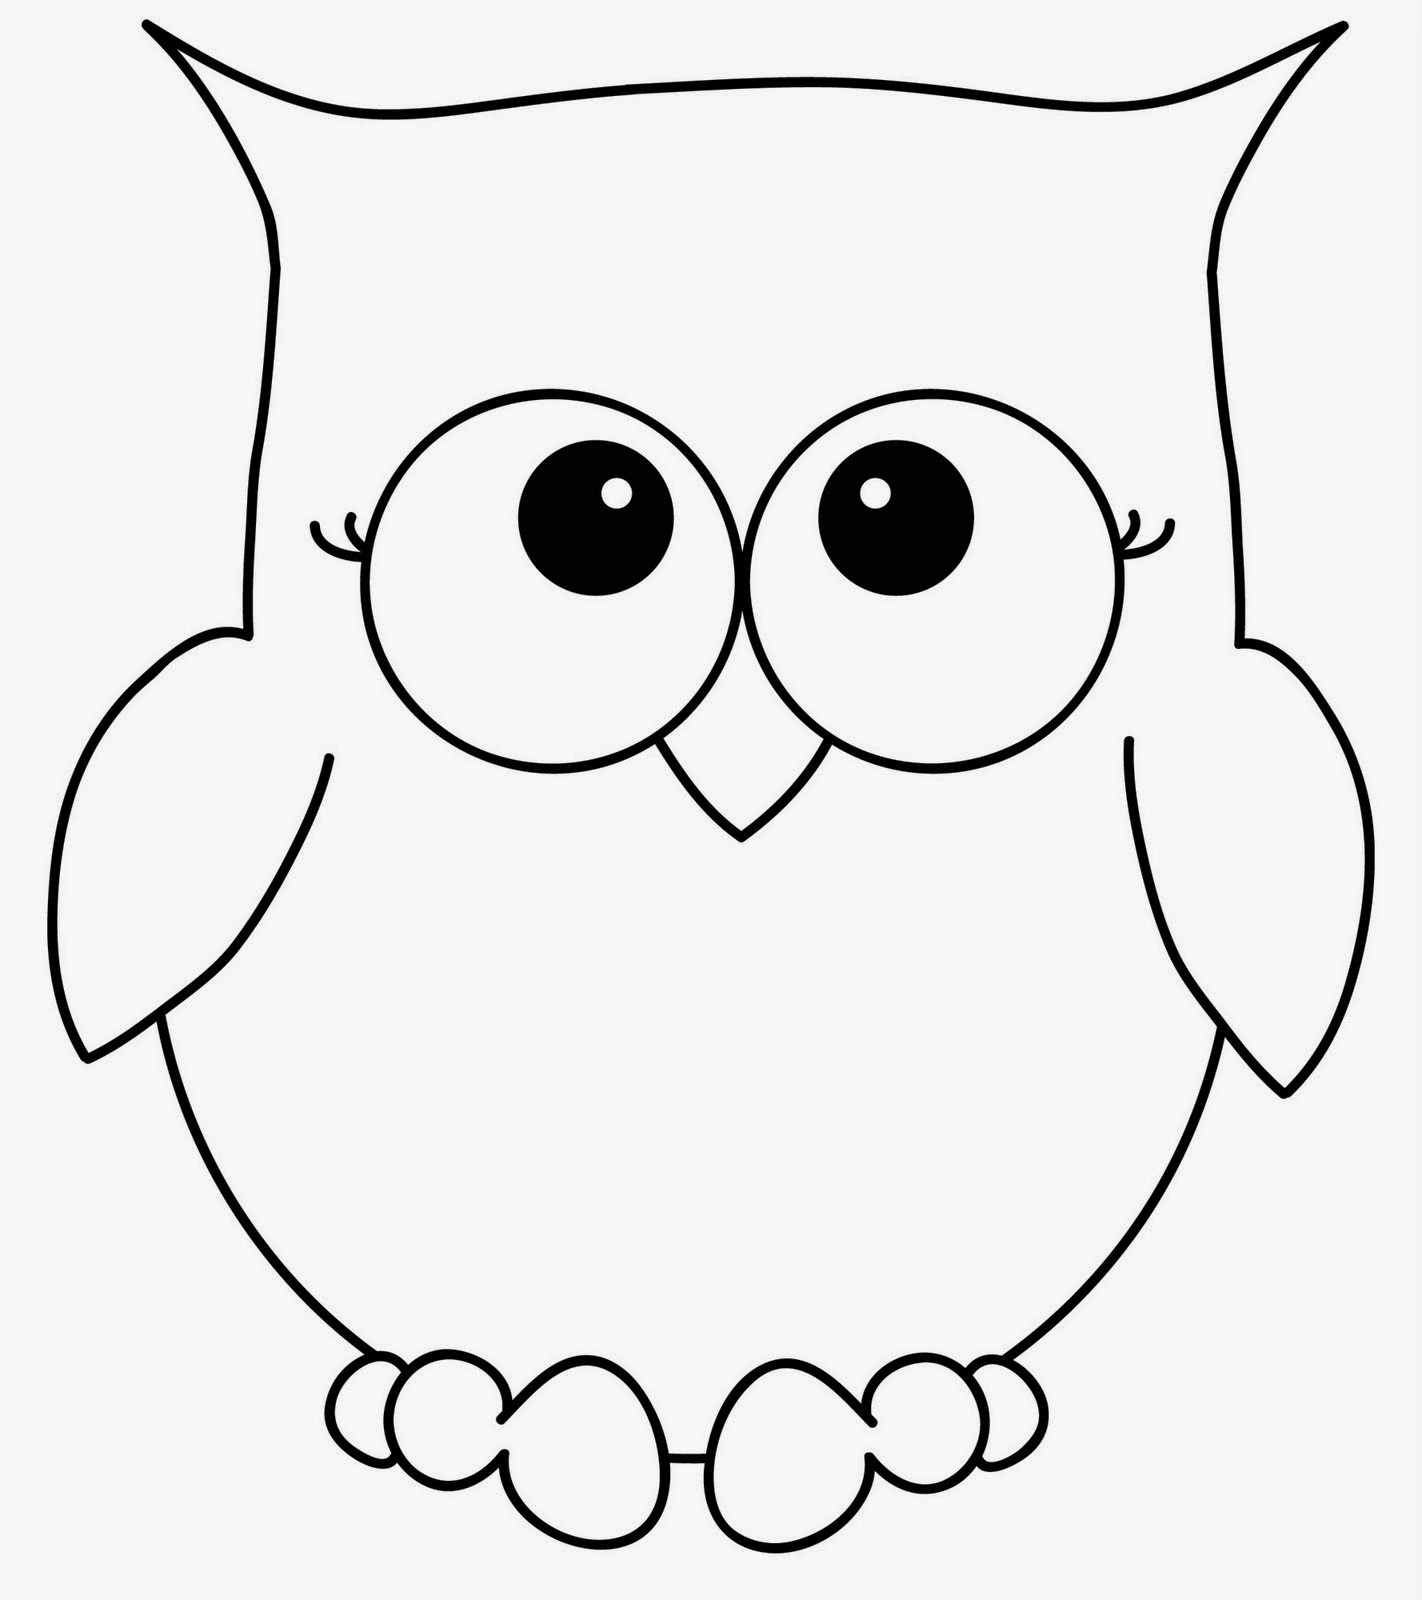 Owl Coloring Pages For Kids
 Selimut ku Cute Lil Owl